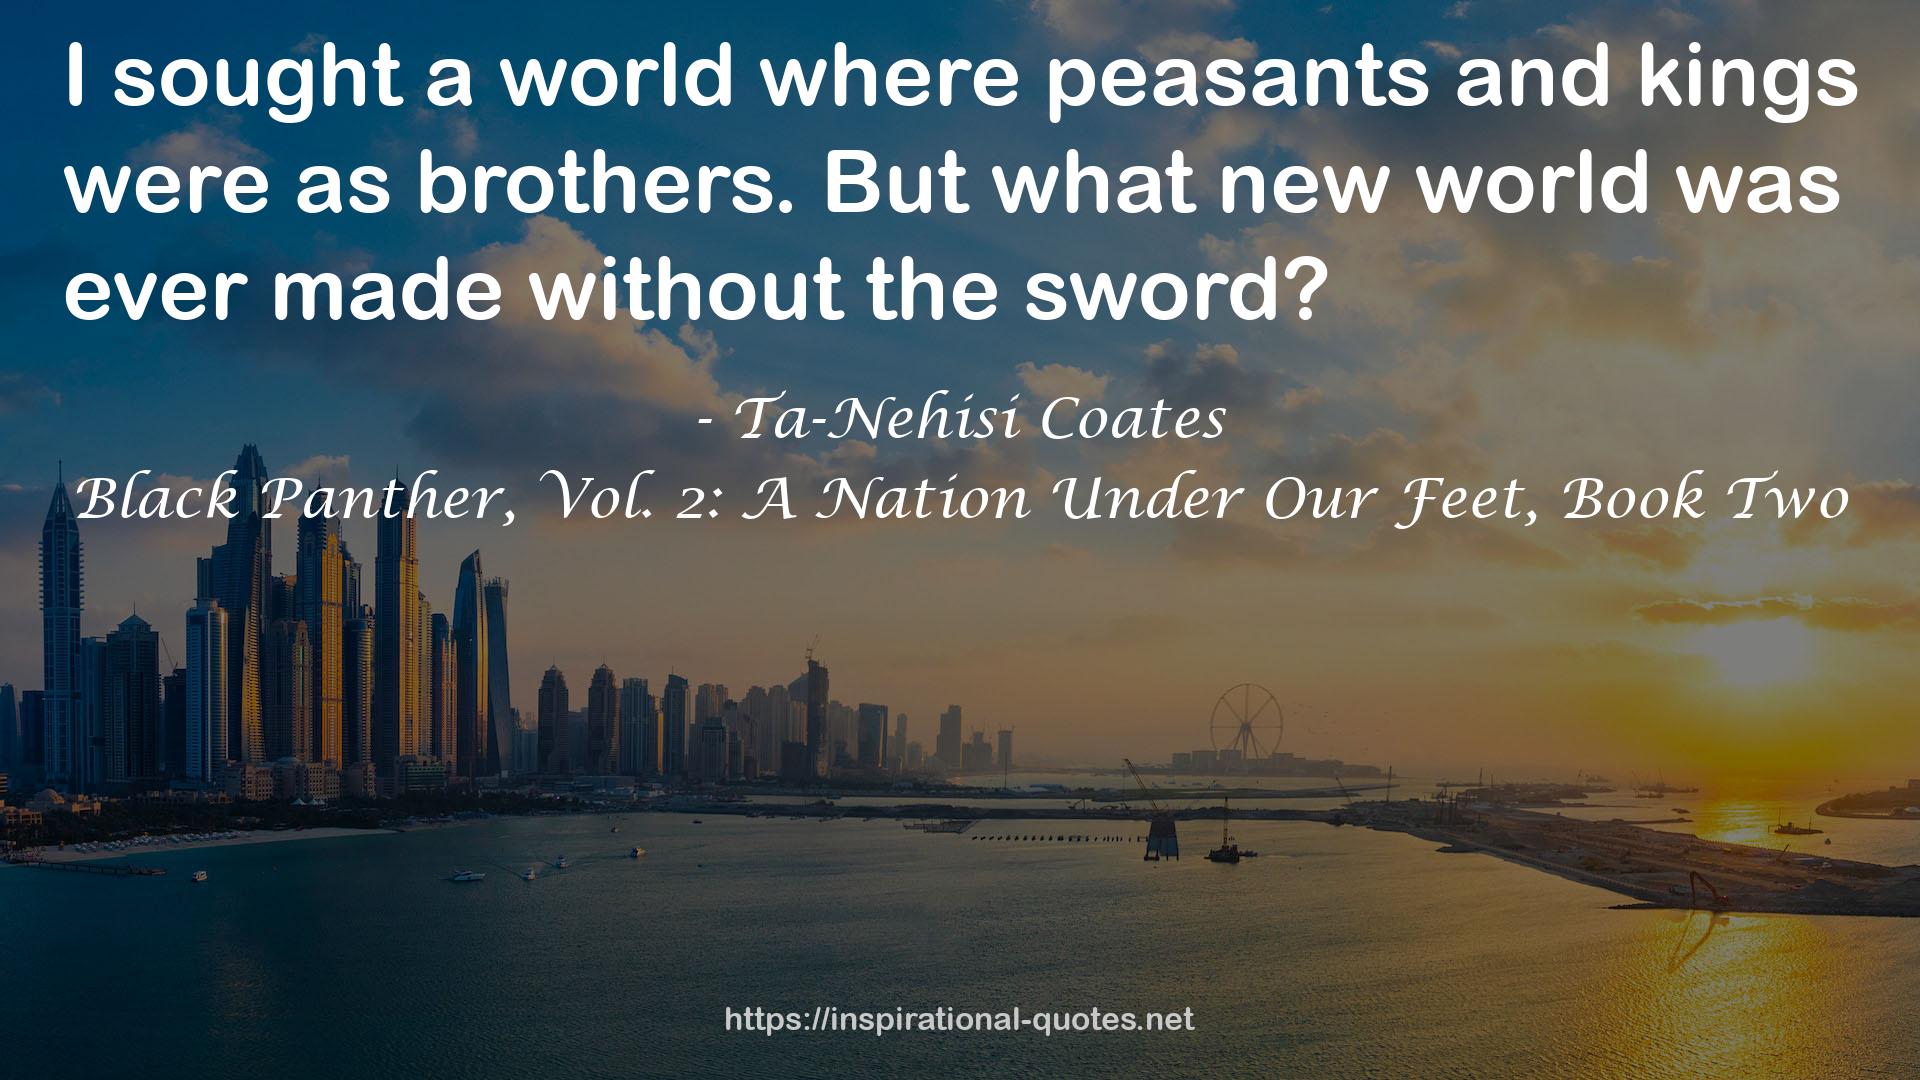 Black Panther, Vol. 2: A Nation Under Our Feet, Book Two QUOTES